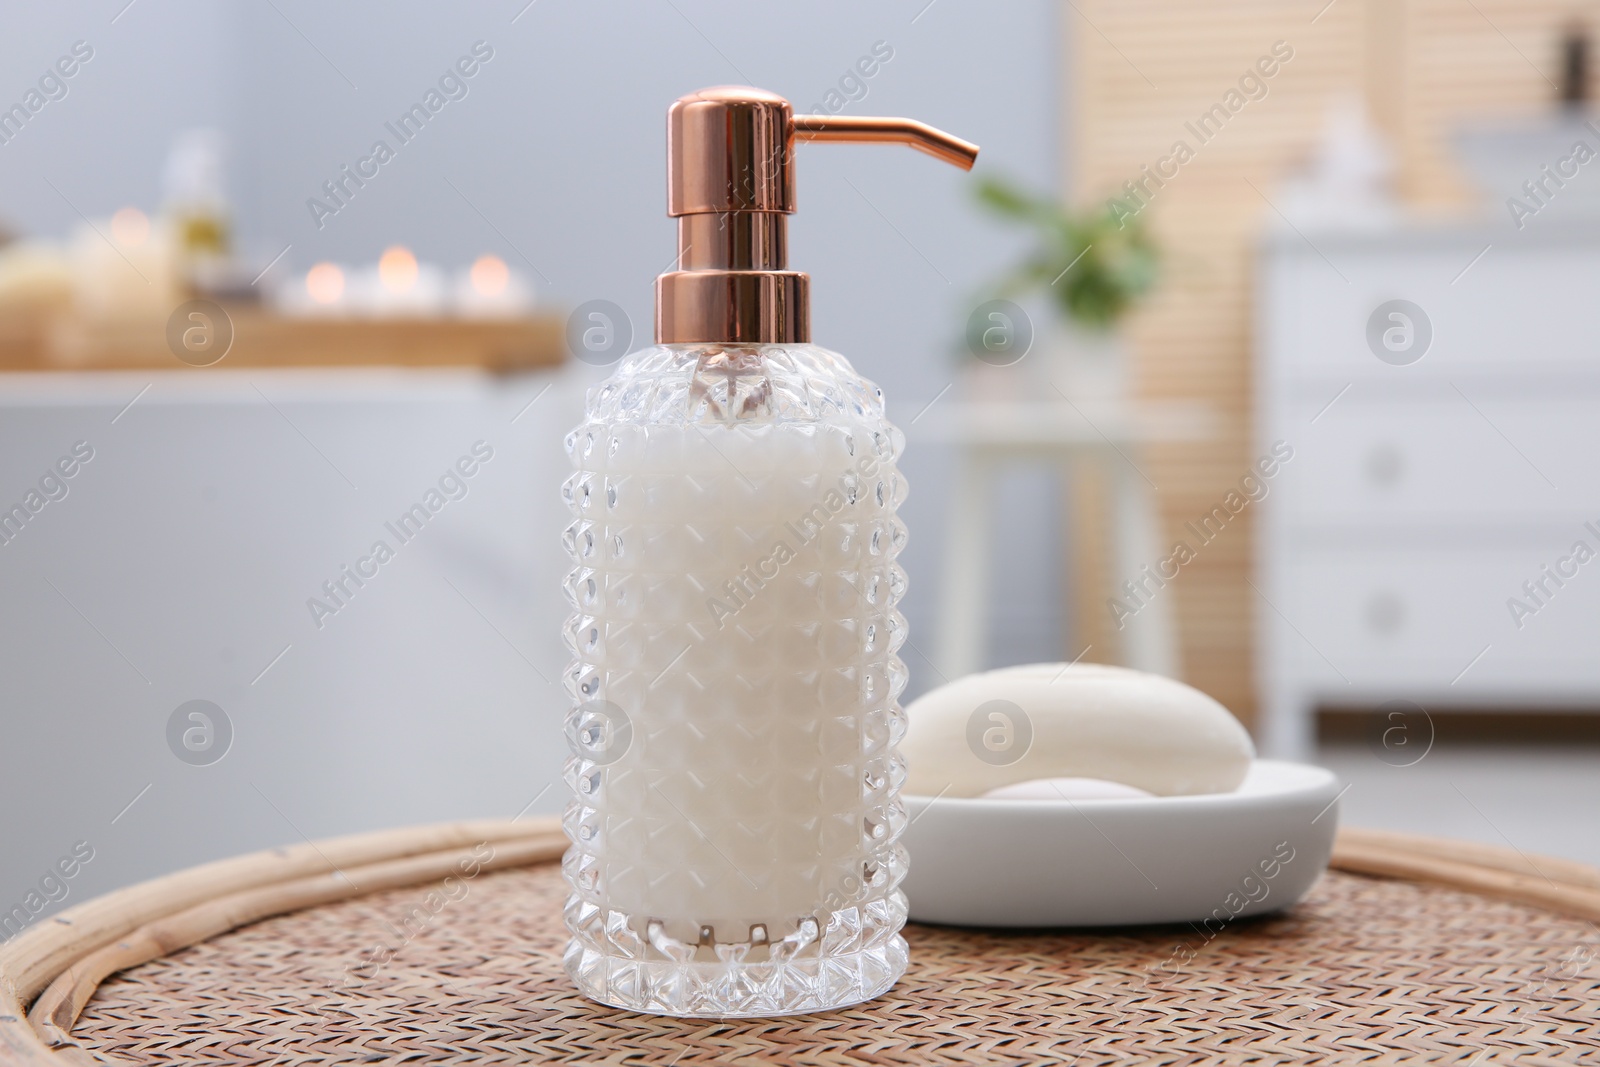 Photo of Stylish glass dispenser and soap bar on wicker stool in bathroom